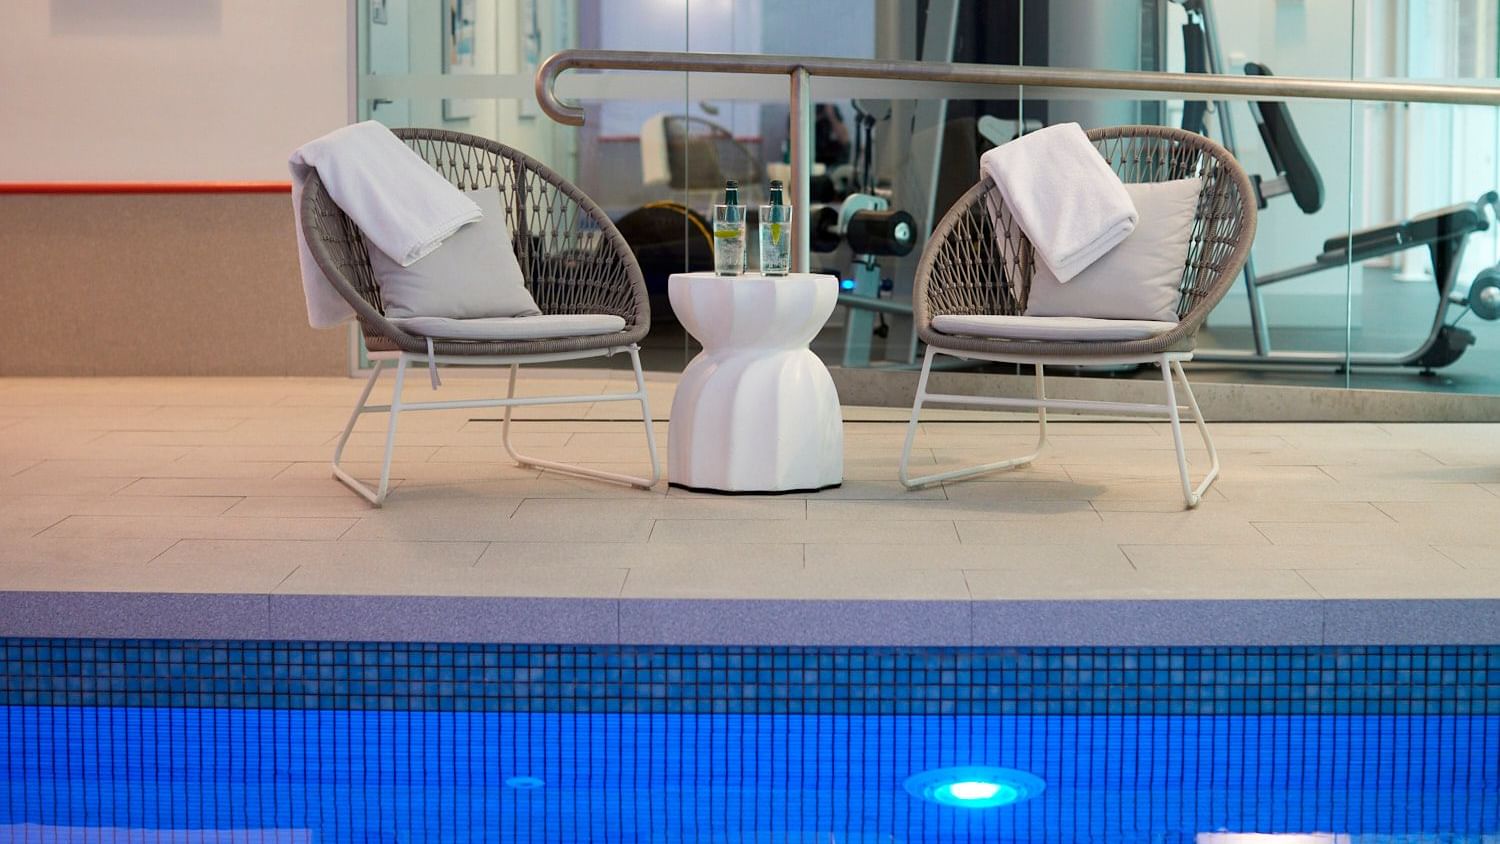 Close up on the indoor pool at Novotel Melbourne on Collins